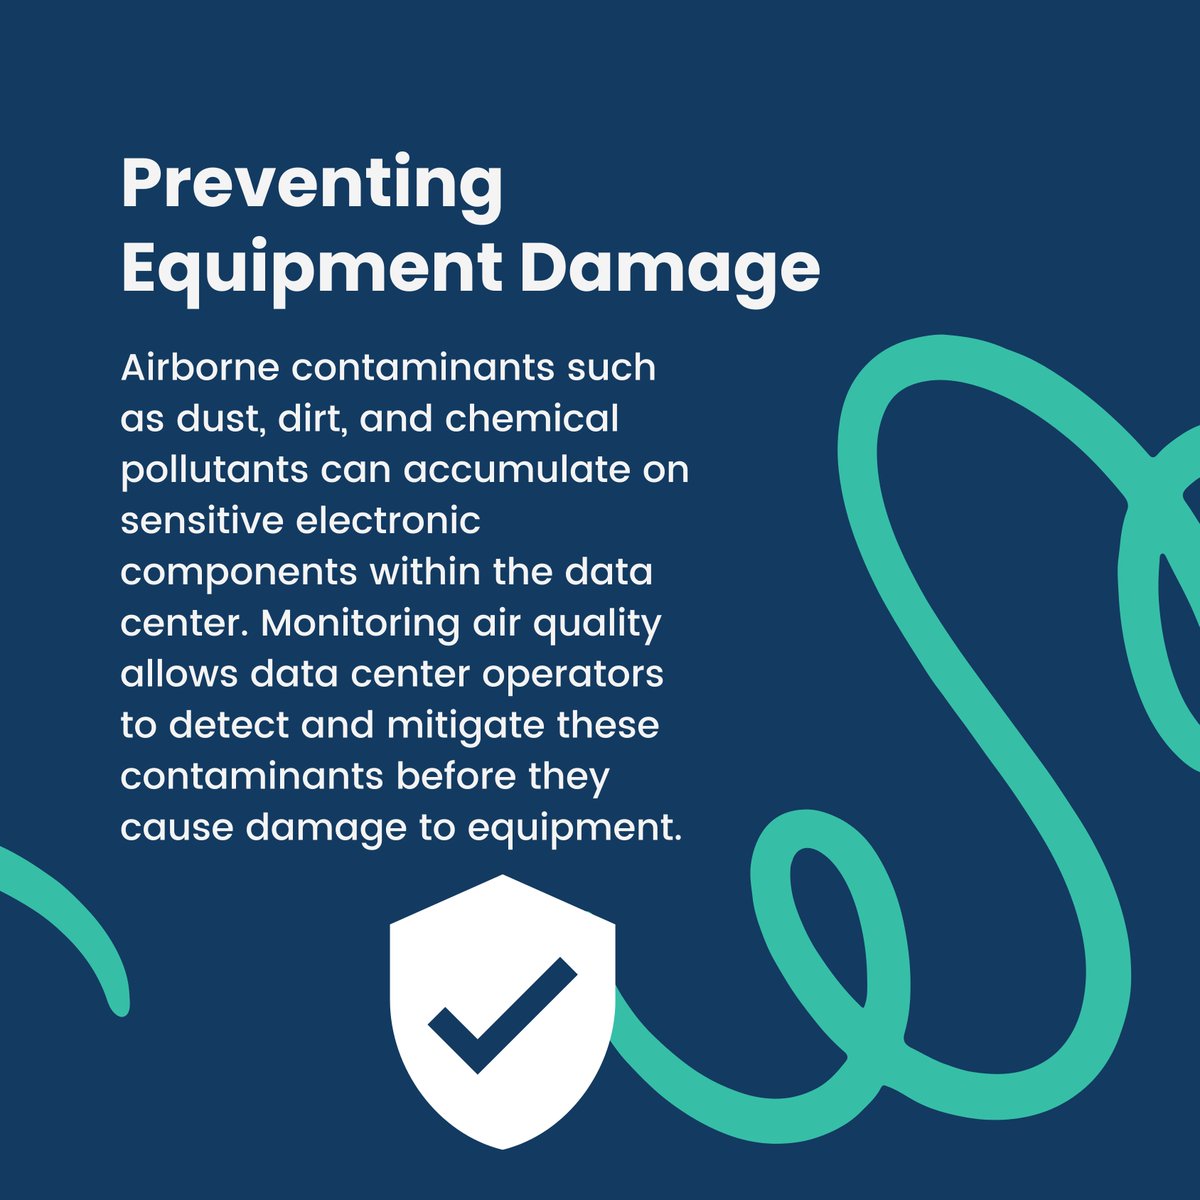 Airborne contaminants can affect #technology, too! 🖥️ 🔌
Learn how to protect your technology 👉 sanalife.info/43PoAbb
•••
#Sanalife #AirPurifier #ActivePure #CleanAir #DataCenter #data #network #cloud #server #FacilityManagement #B2B #HealthyBuildings